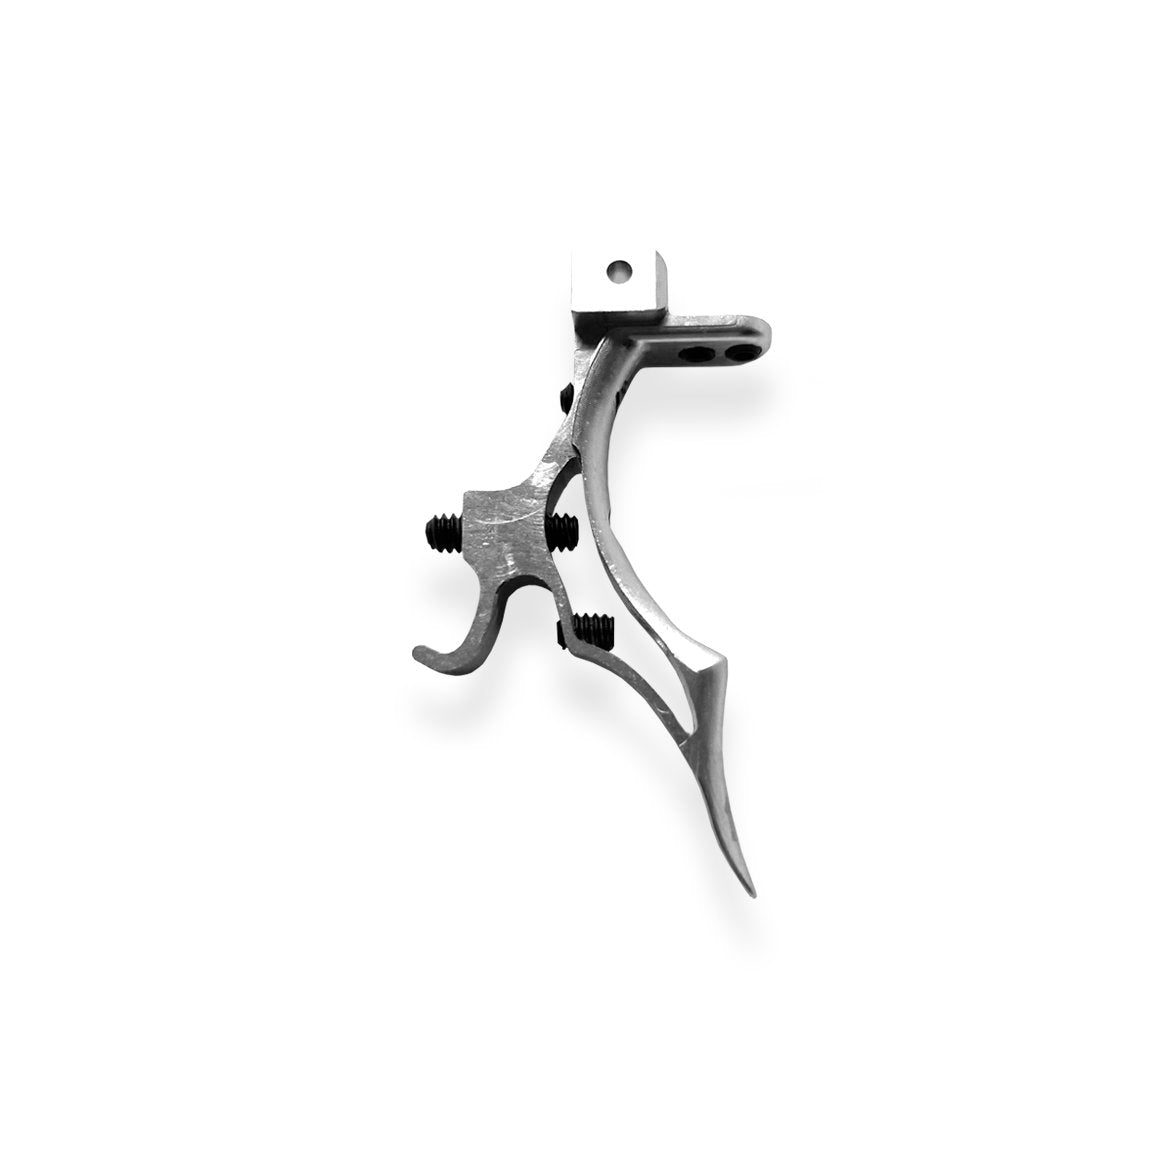  GEO "Type S" Deuce Trigger (Fits LV1, LV1.6 LV1.1, LV1.5, LVR, GEO 3.5) - Eminent Paintball And Airsoft